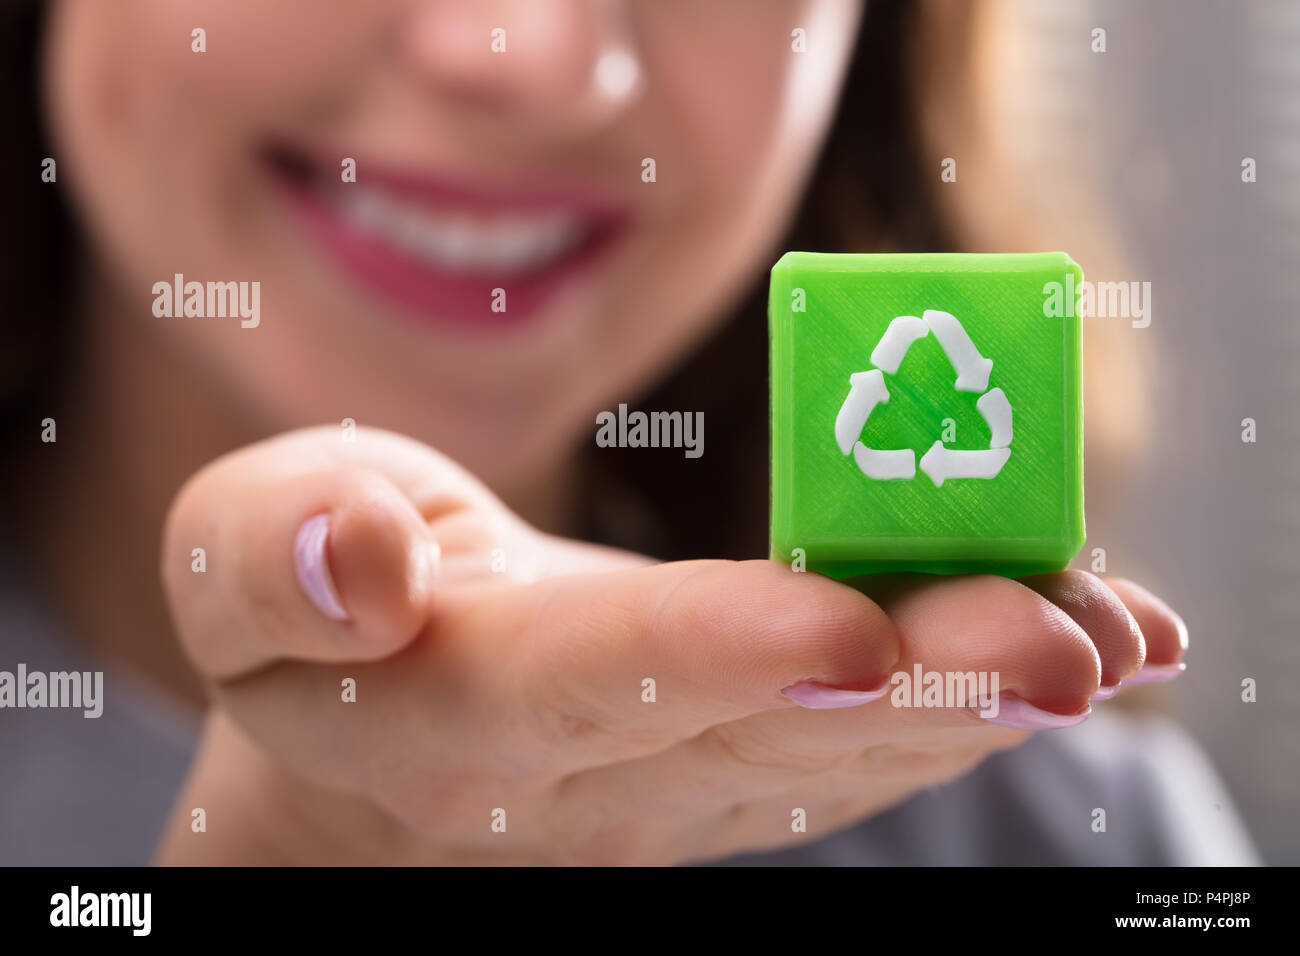 Close-up Of A Woman's Hand Holding Green Cubic Block With Recycle Symbol Stock Photo